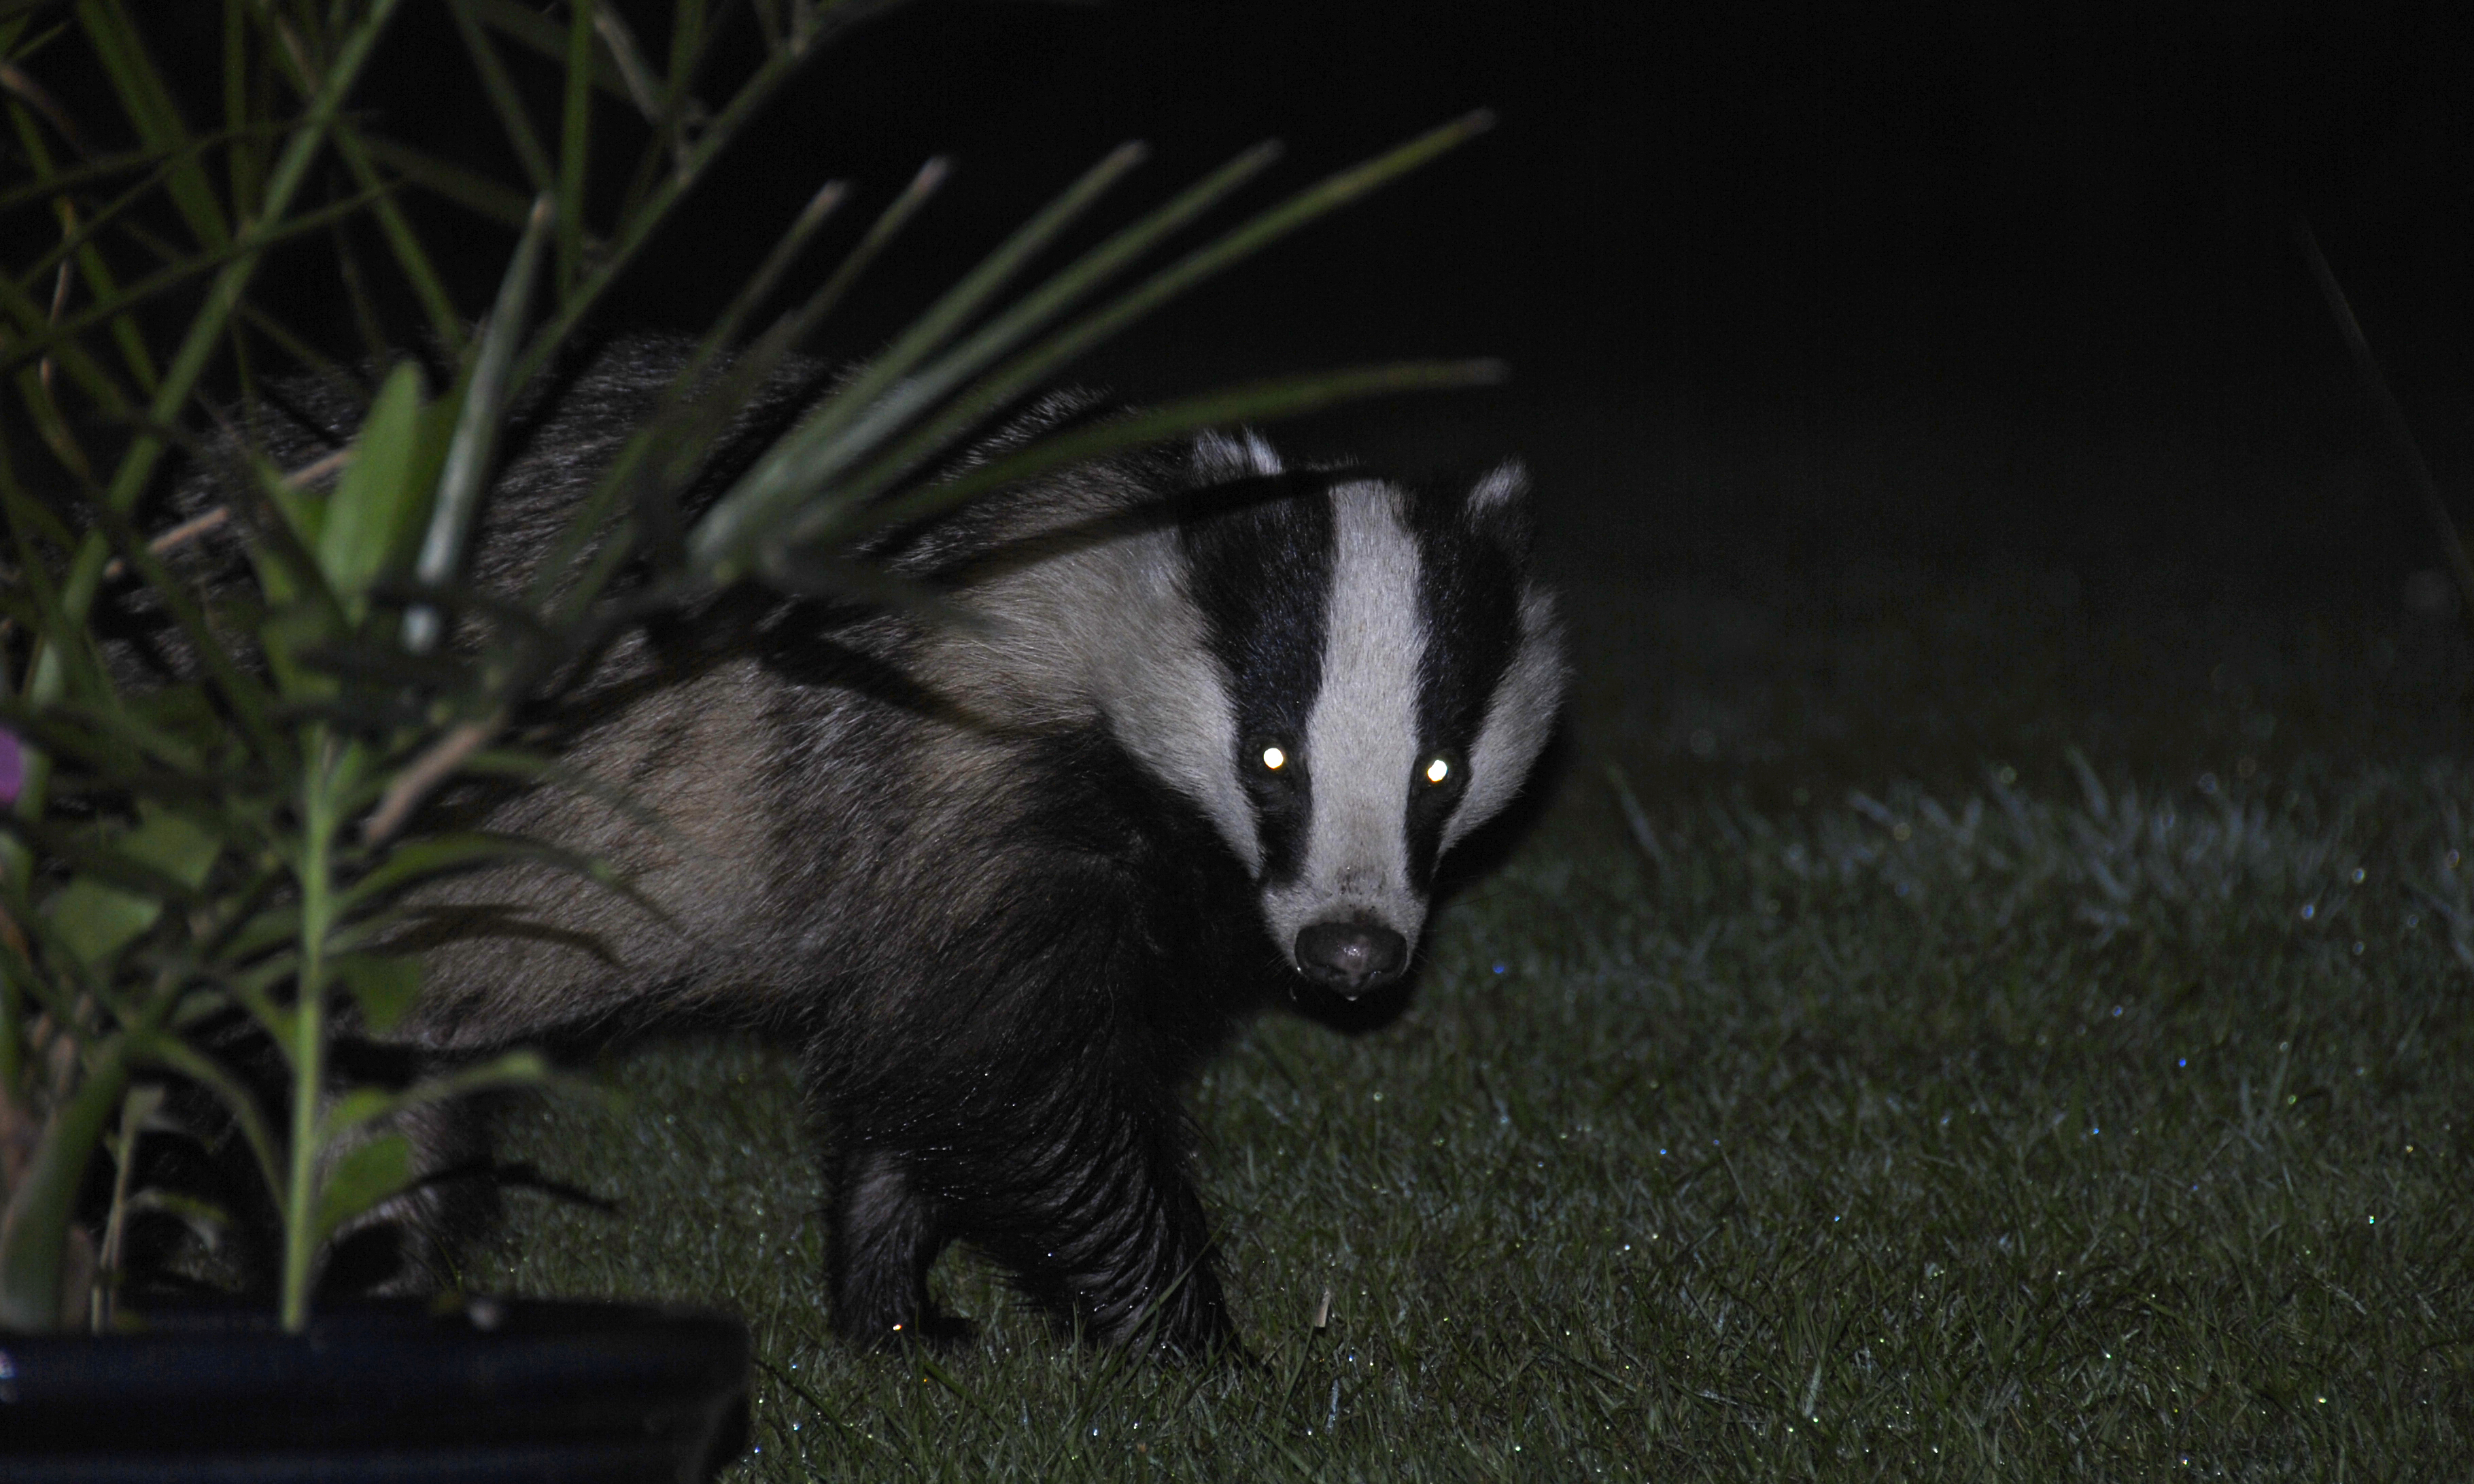 Badger_in_the_dark_with_reflecting_eyes.jpg